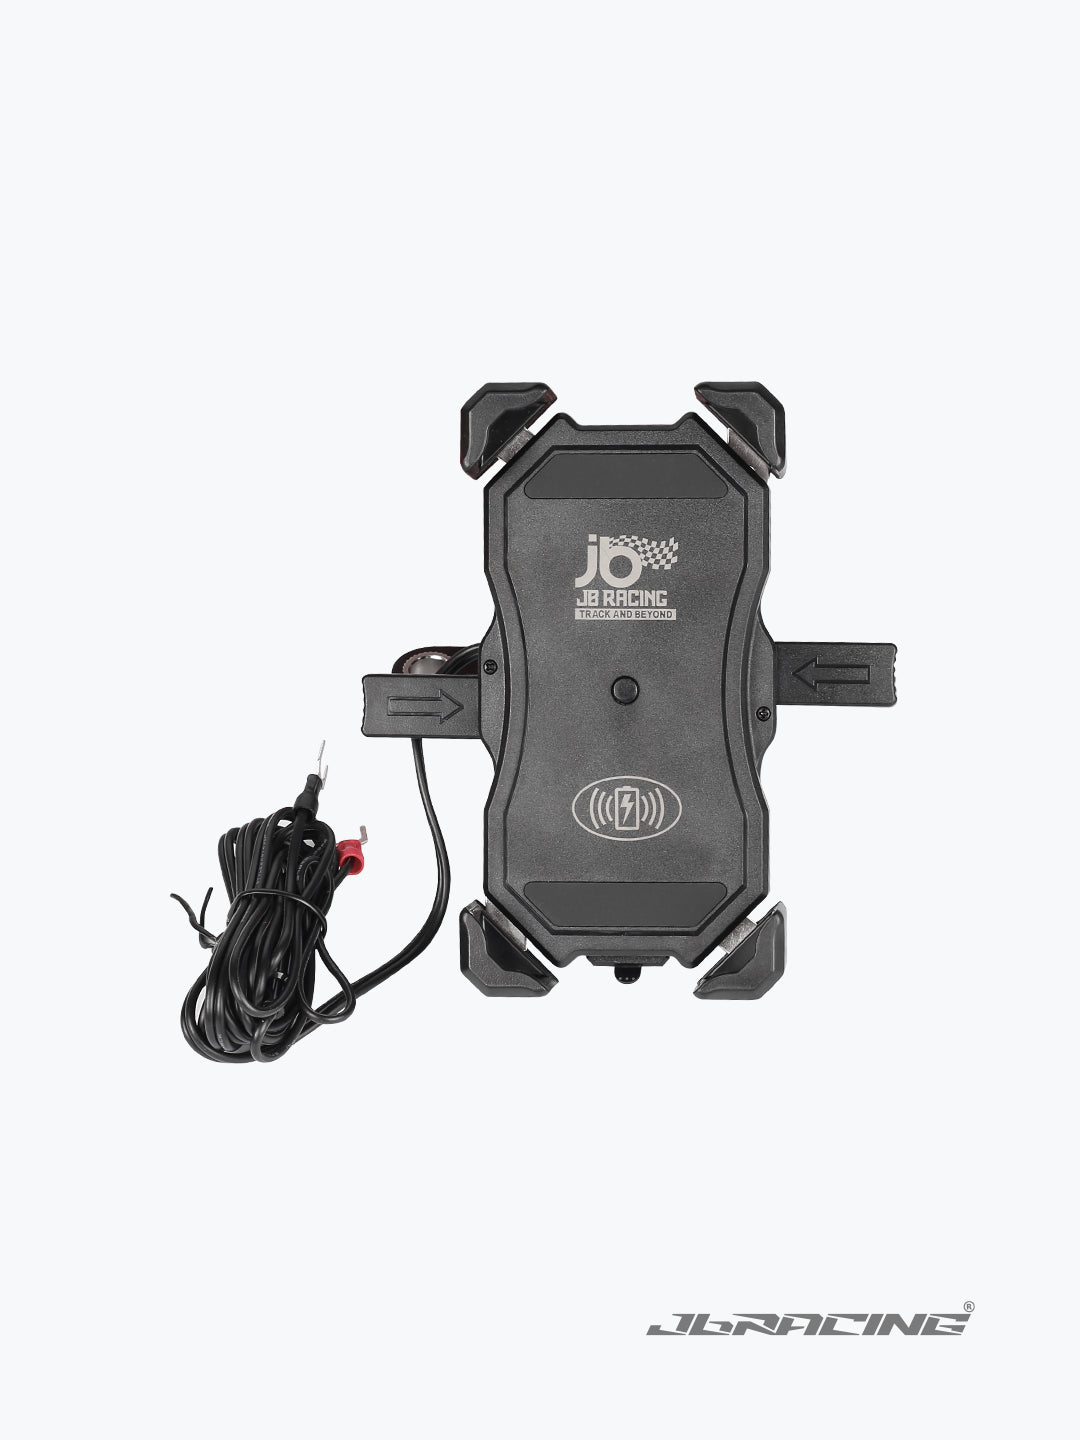 JB Racing M11-A1 Mobile Charger Handle Mount